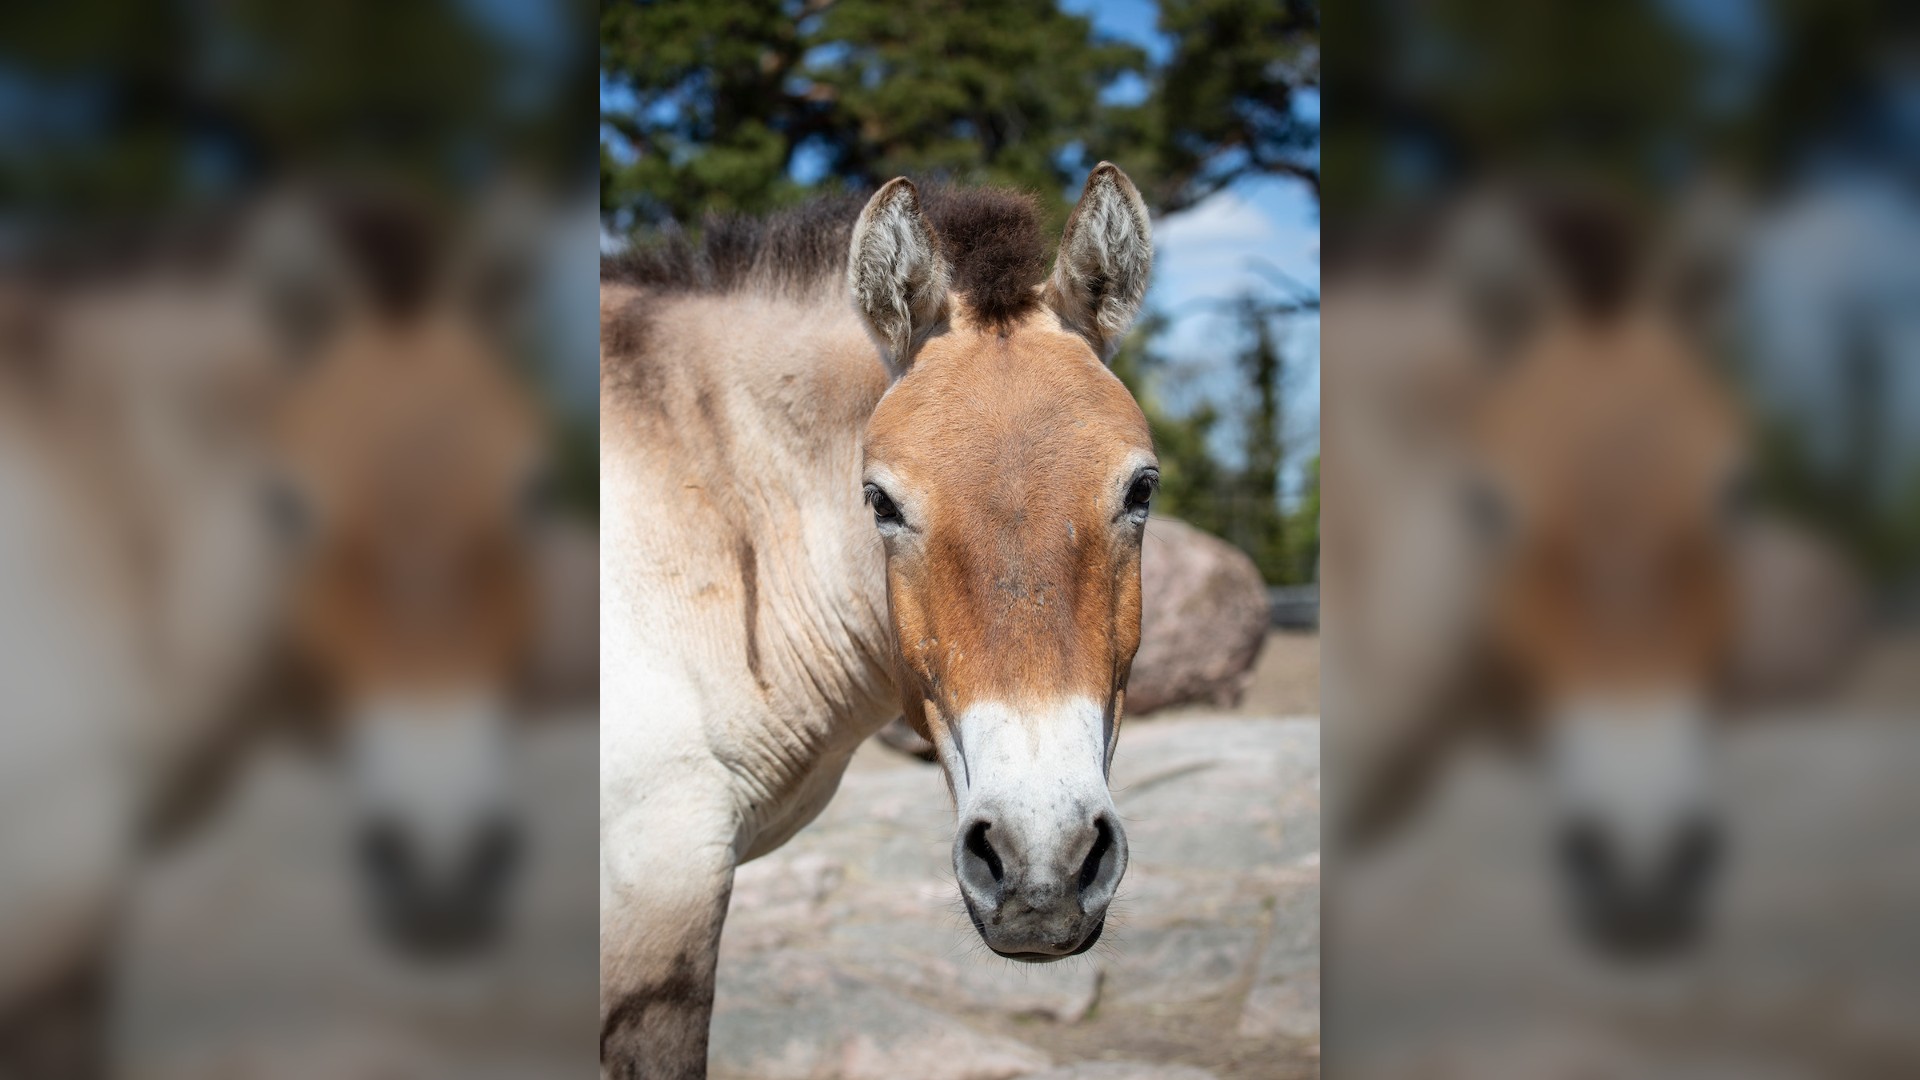 The Yamnaya people didn't ride Przewalski's horses, but these hoofed animals are likely close to what ancient horses looked like in terms of appearance, color and size.